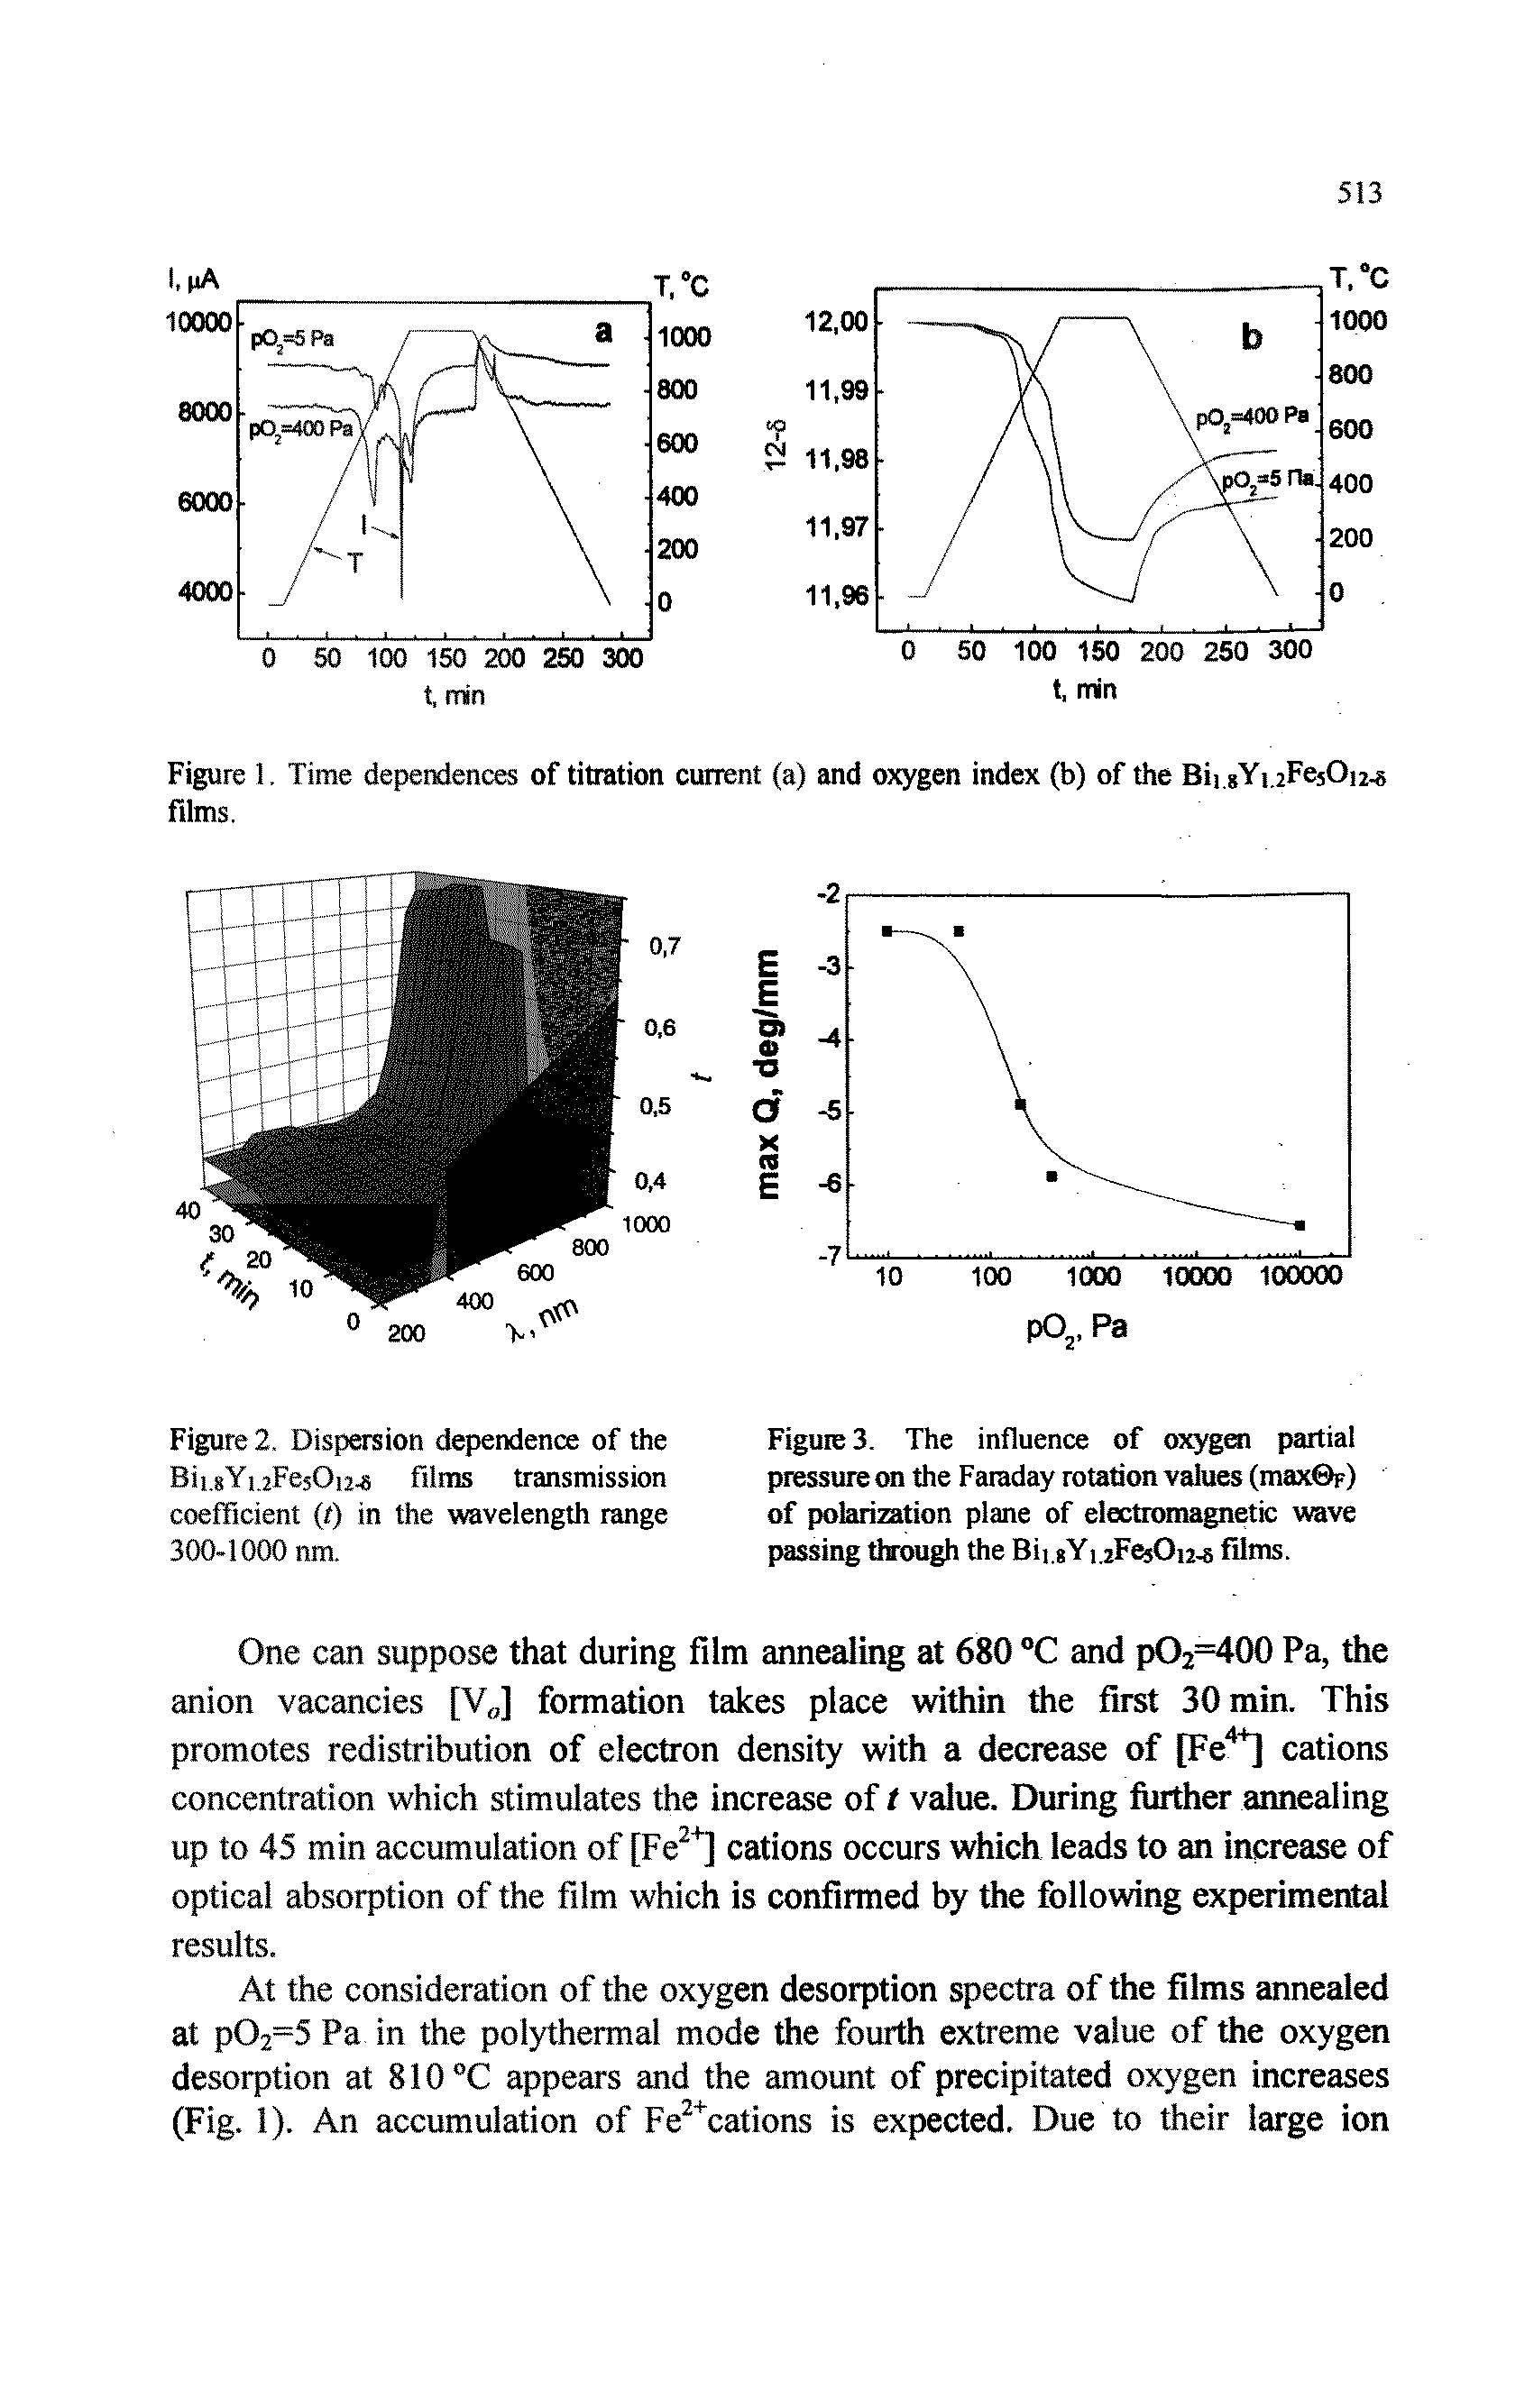 Figure 3. The influence of oxygen partial pressure on the Faraday rotation values (maxOr) of polarimtion plane of electromagnetic wave passing tlrough the Bii.gYijFesOn-B films.